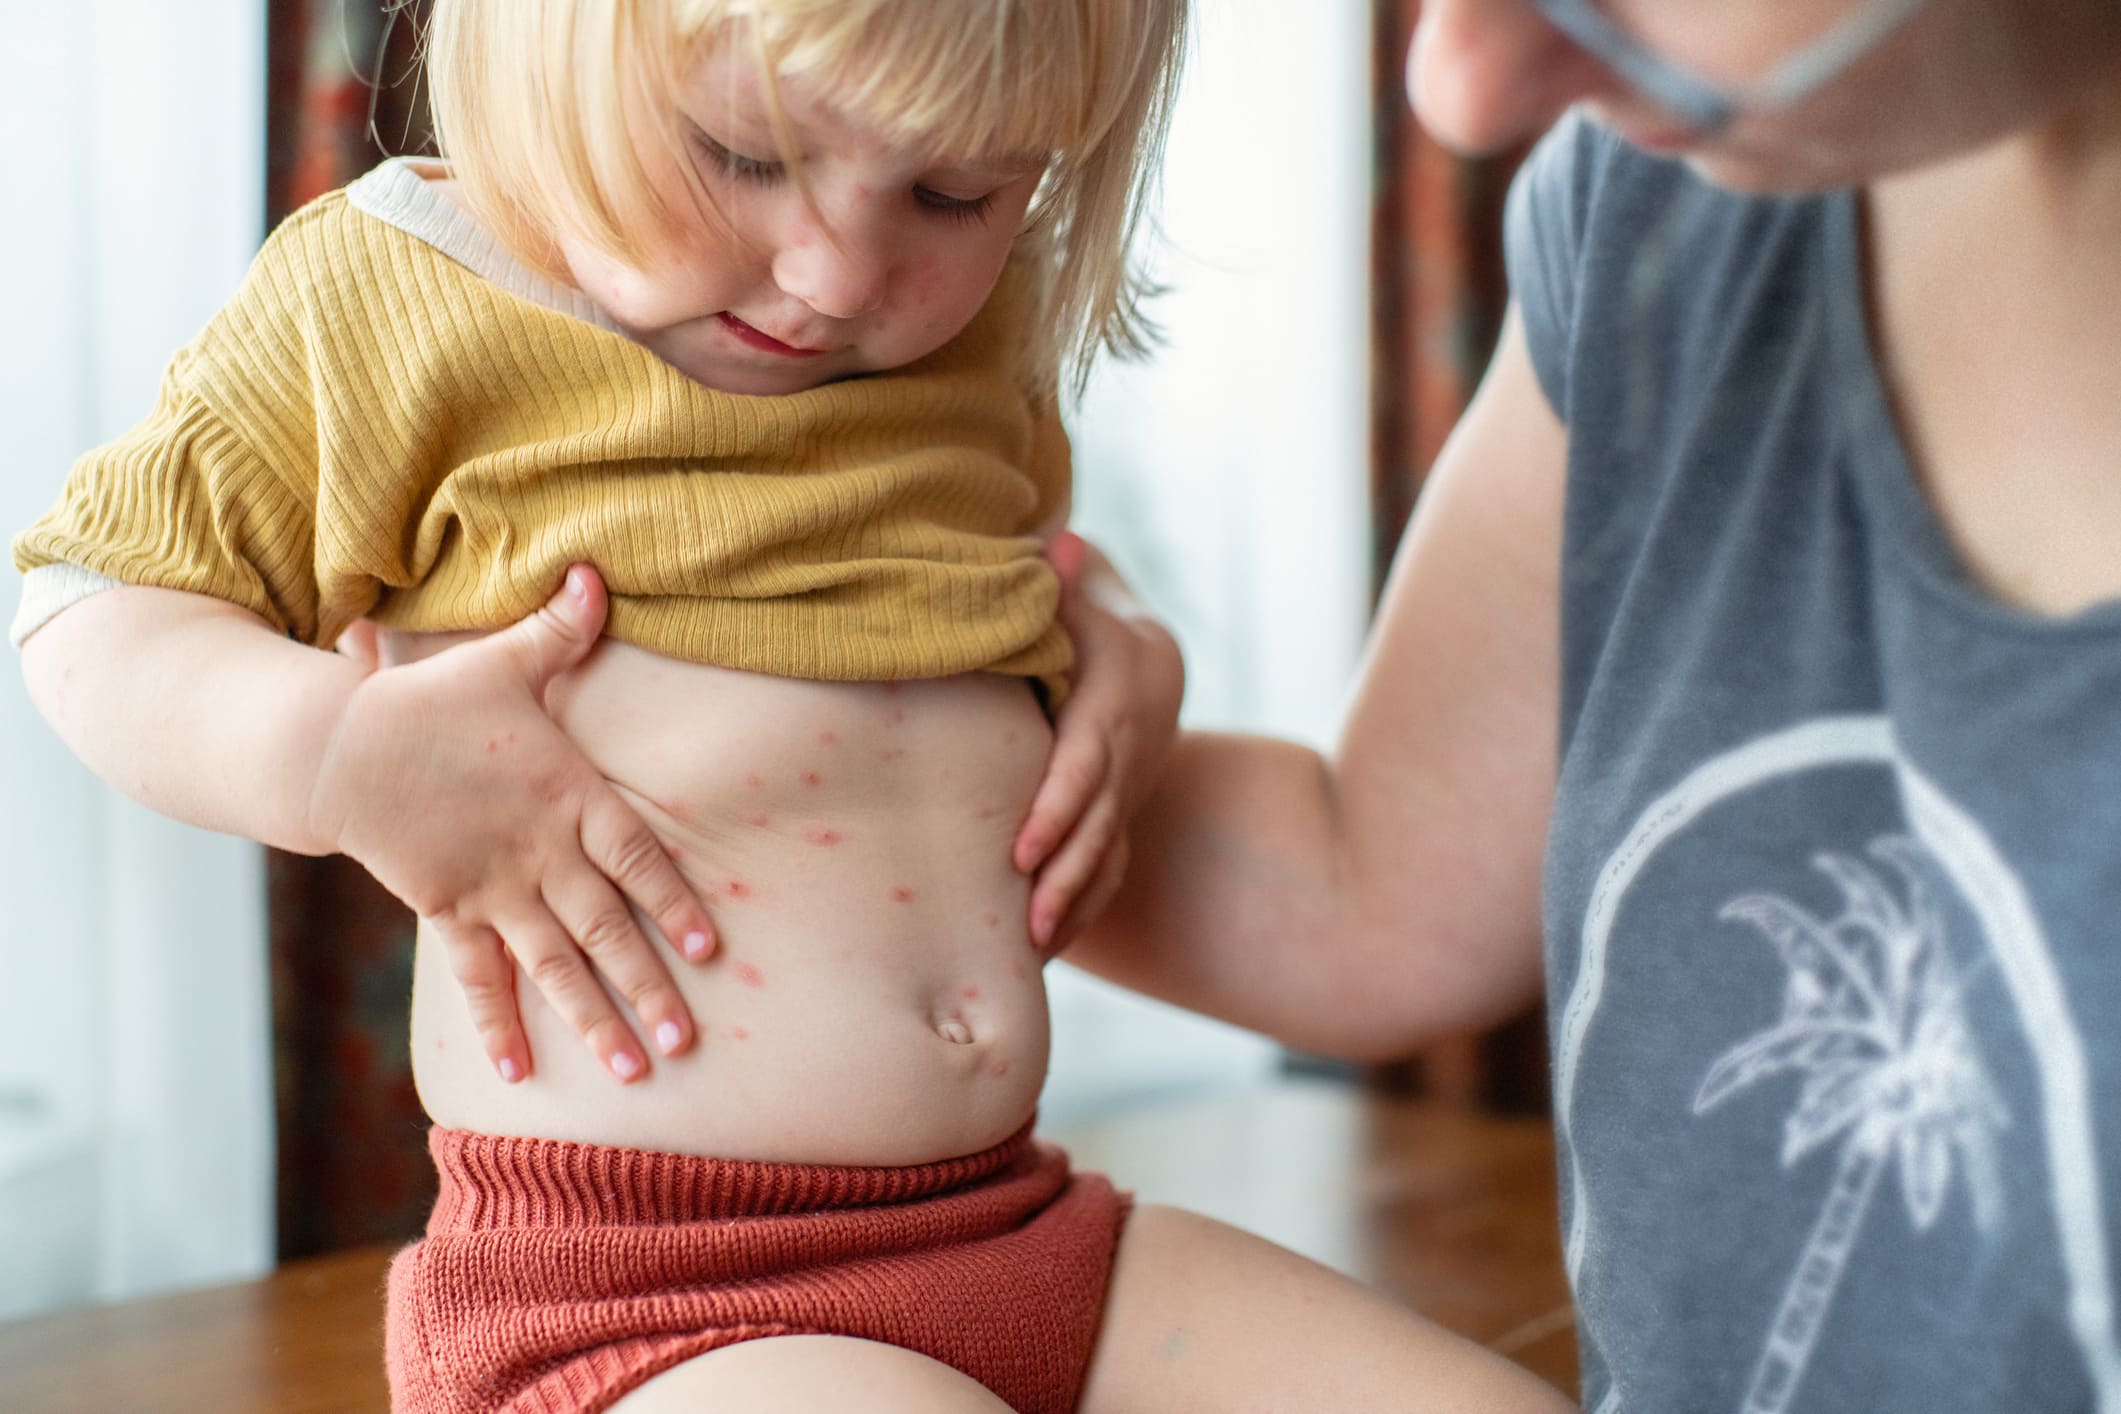 Can Eczema Go Away On Its Own?